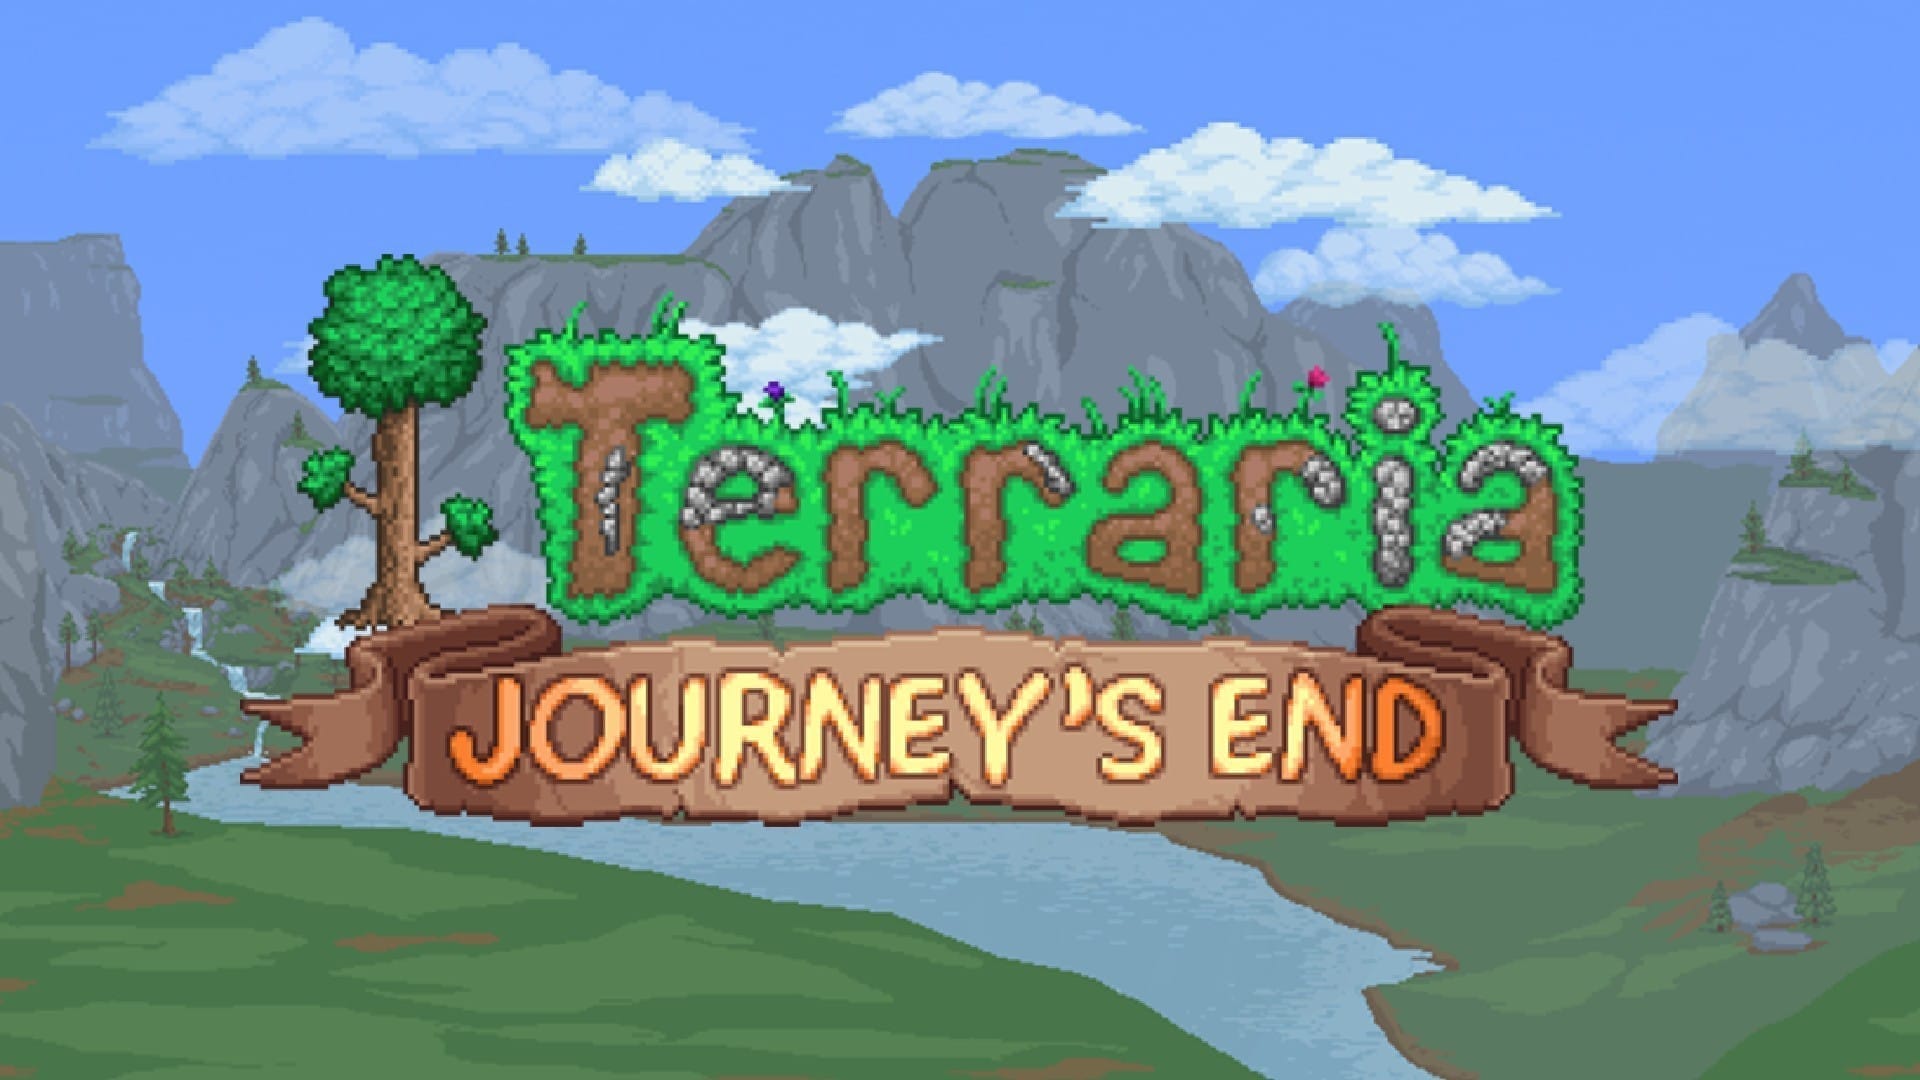 Terraria Keeps Getting Better, Journey's End Update is Now Live